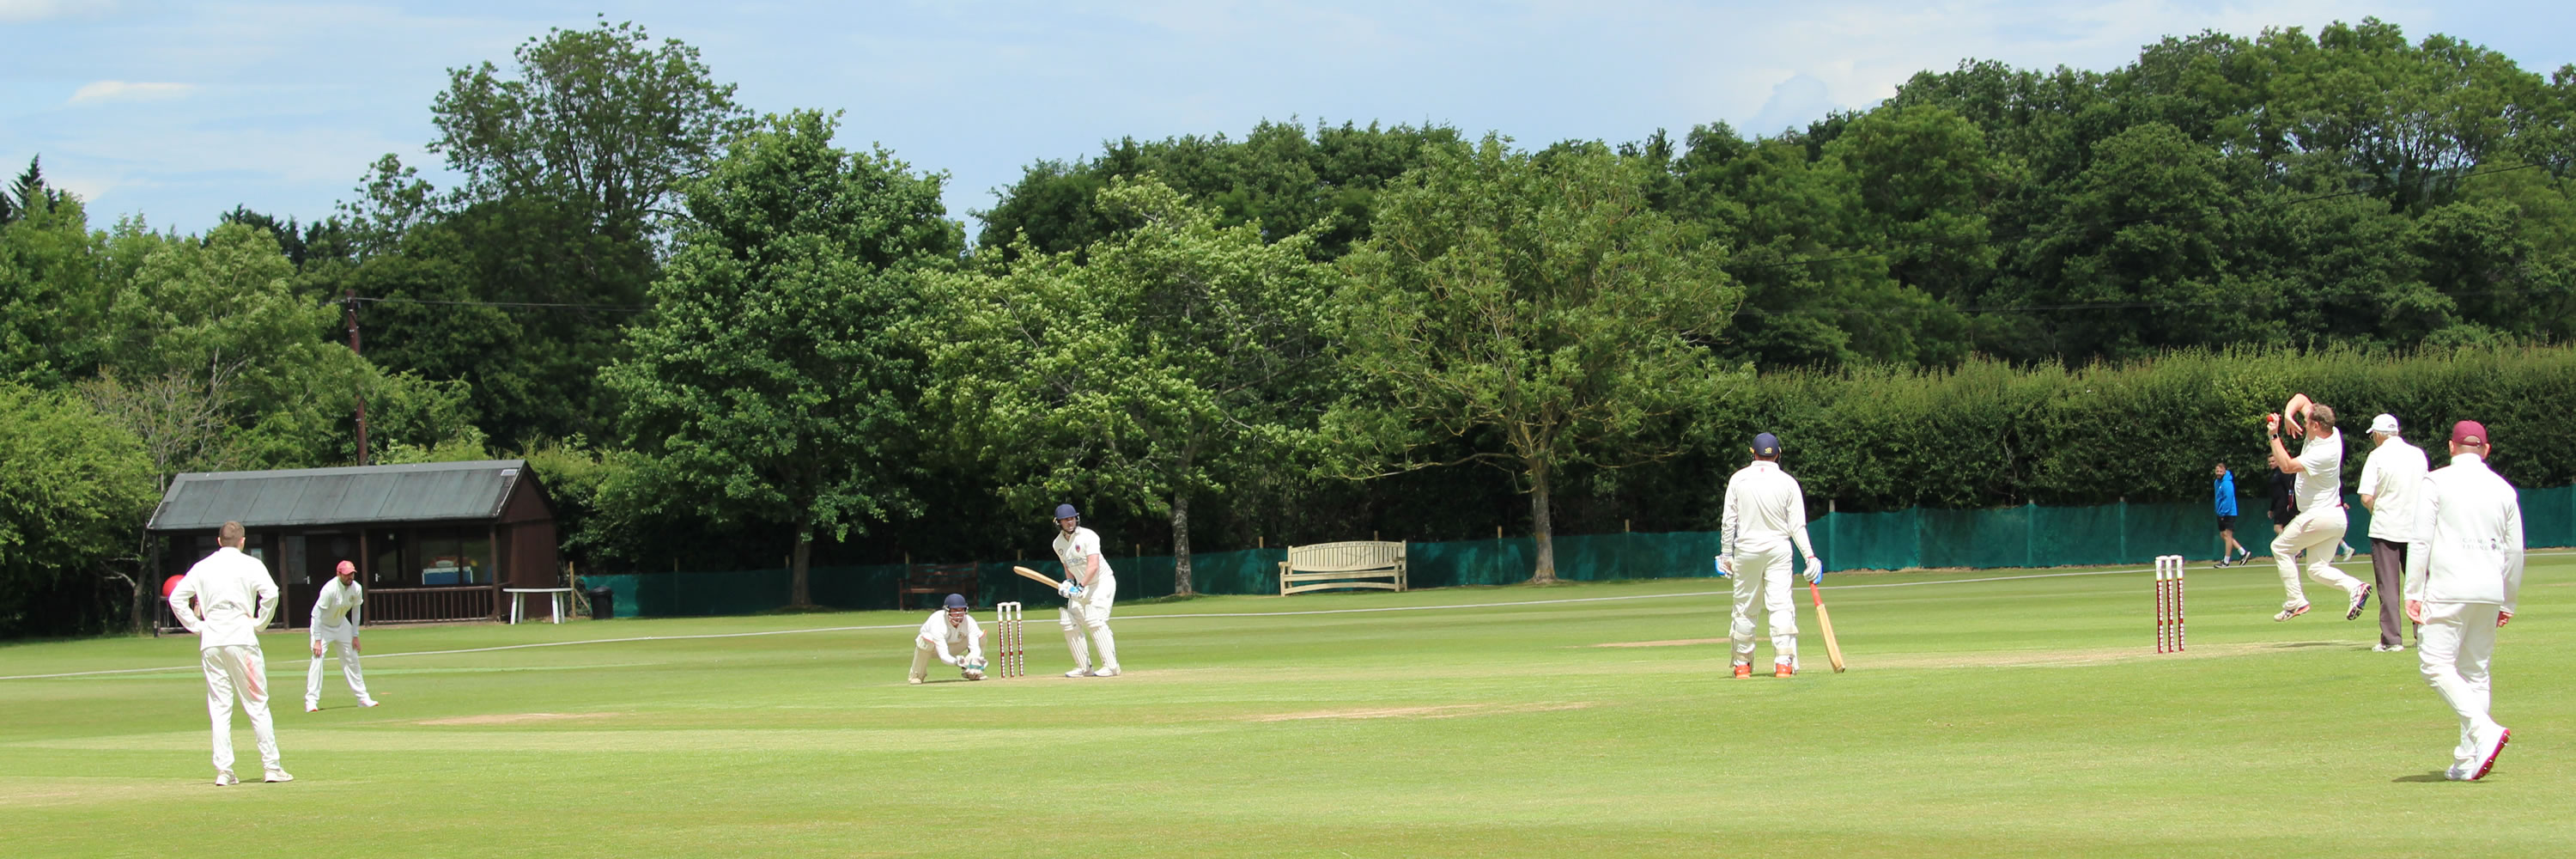 Worcestershire County Cricket League